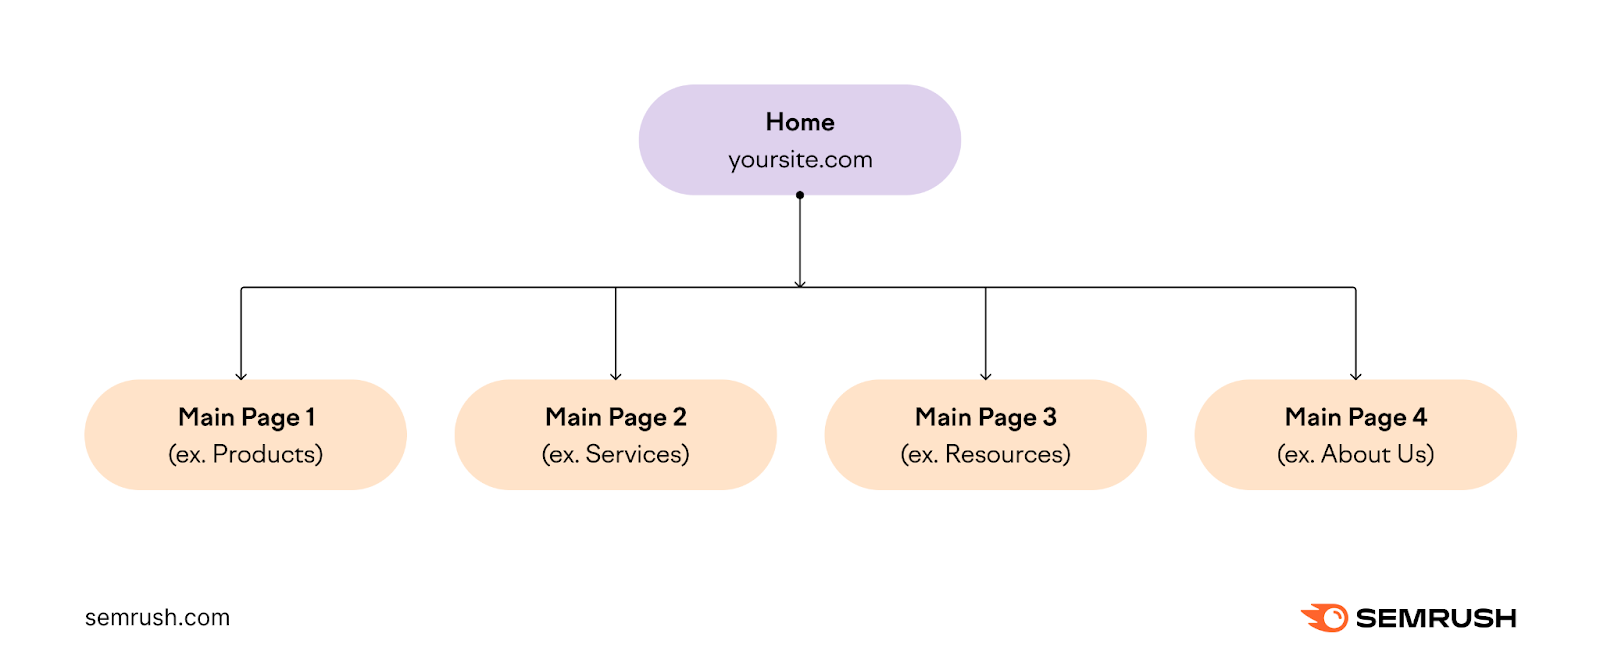 A visual showing a website navigation, with "Home" at top and main pages added to the top-level navigation (the first layer)